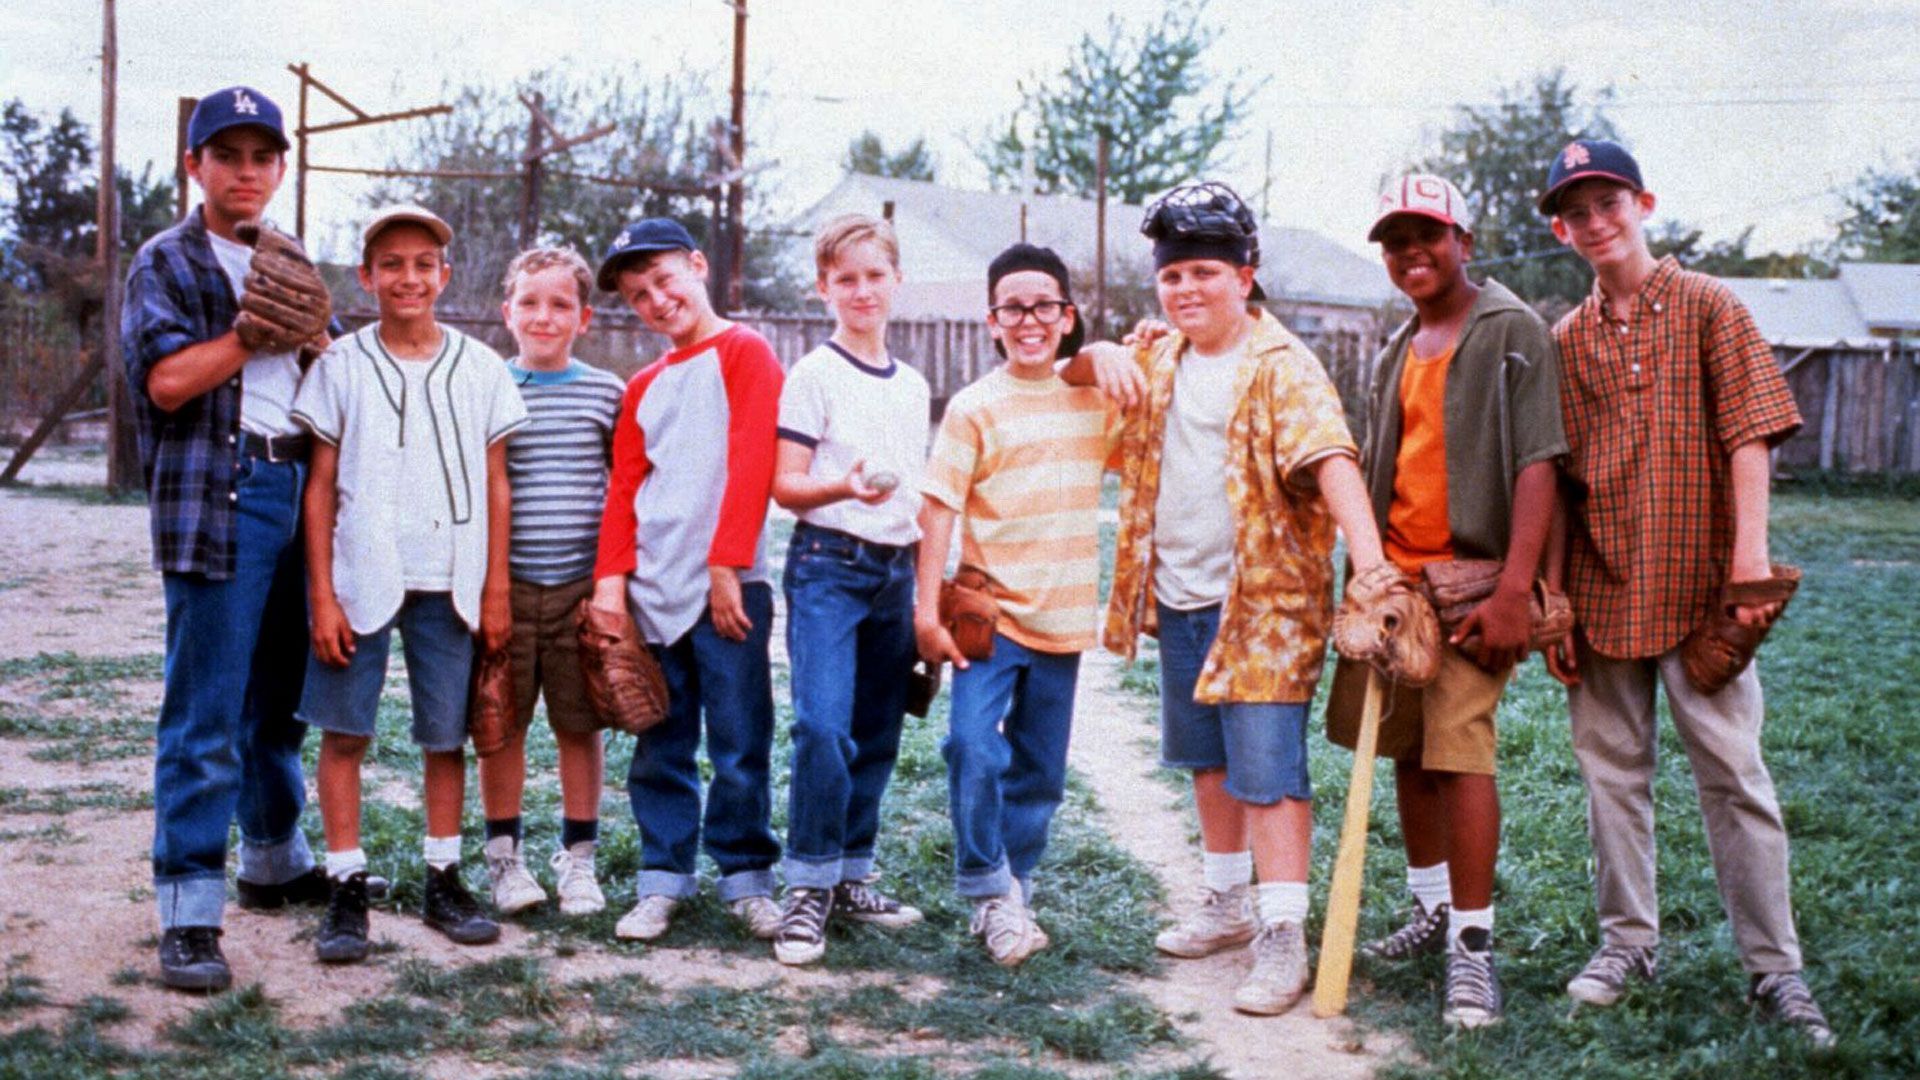 The Sandlot': Ranking the 19 best quotes from the classic baseball